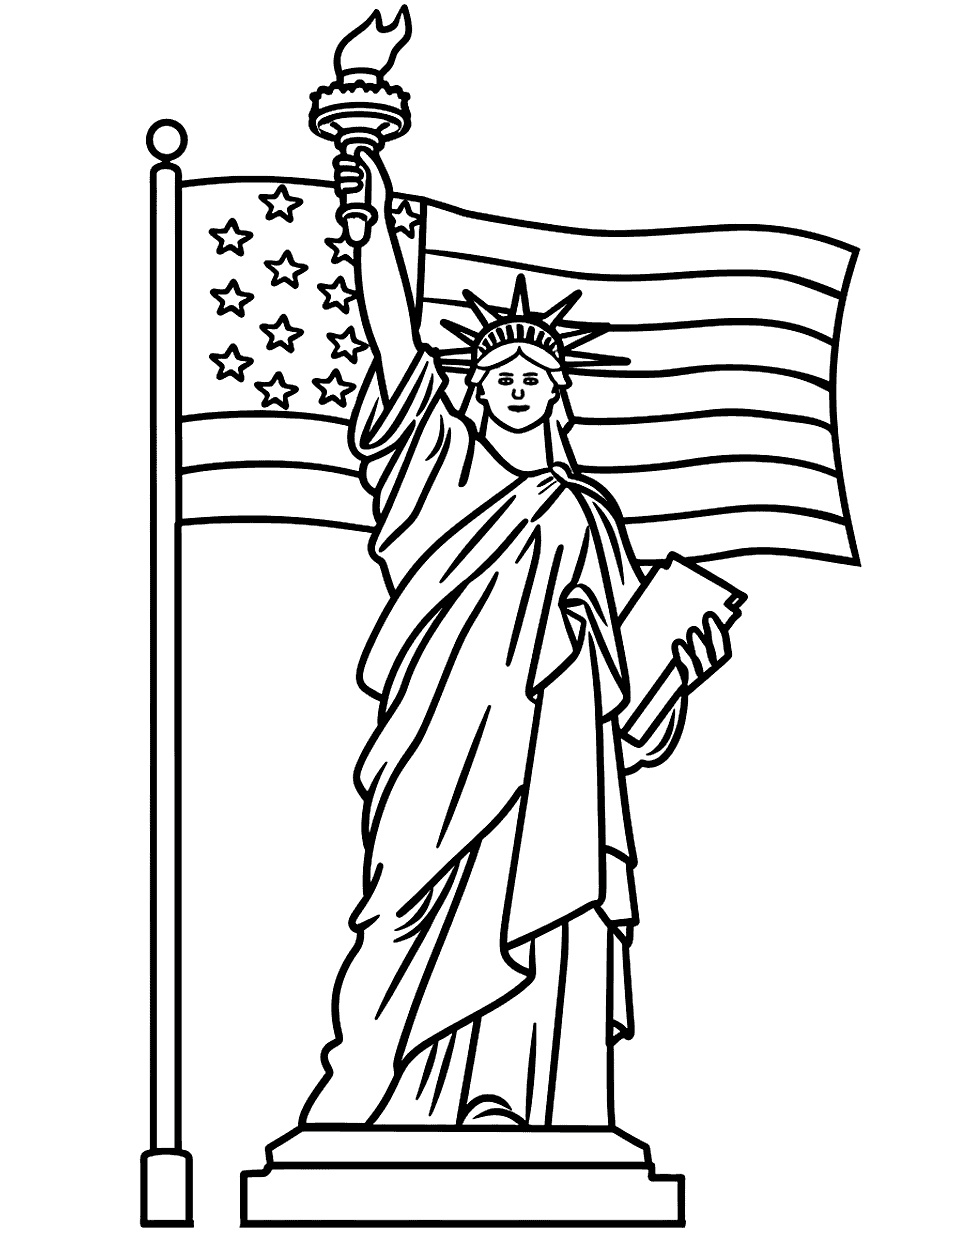 Statue of Liberty and Flag American Coloring Page - The Statue of Liberty holding the torch high with the American flag in the background.